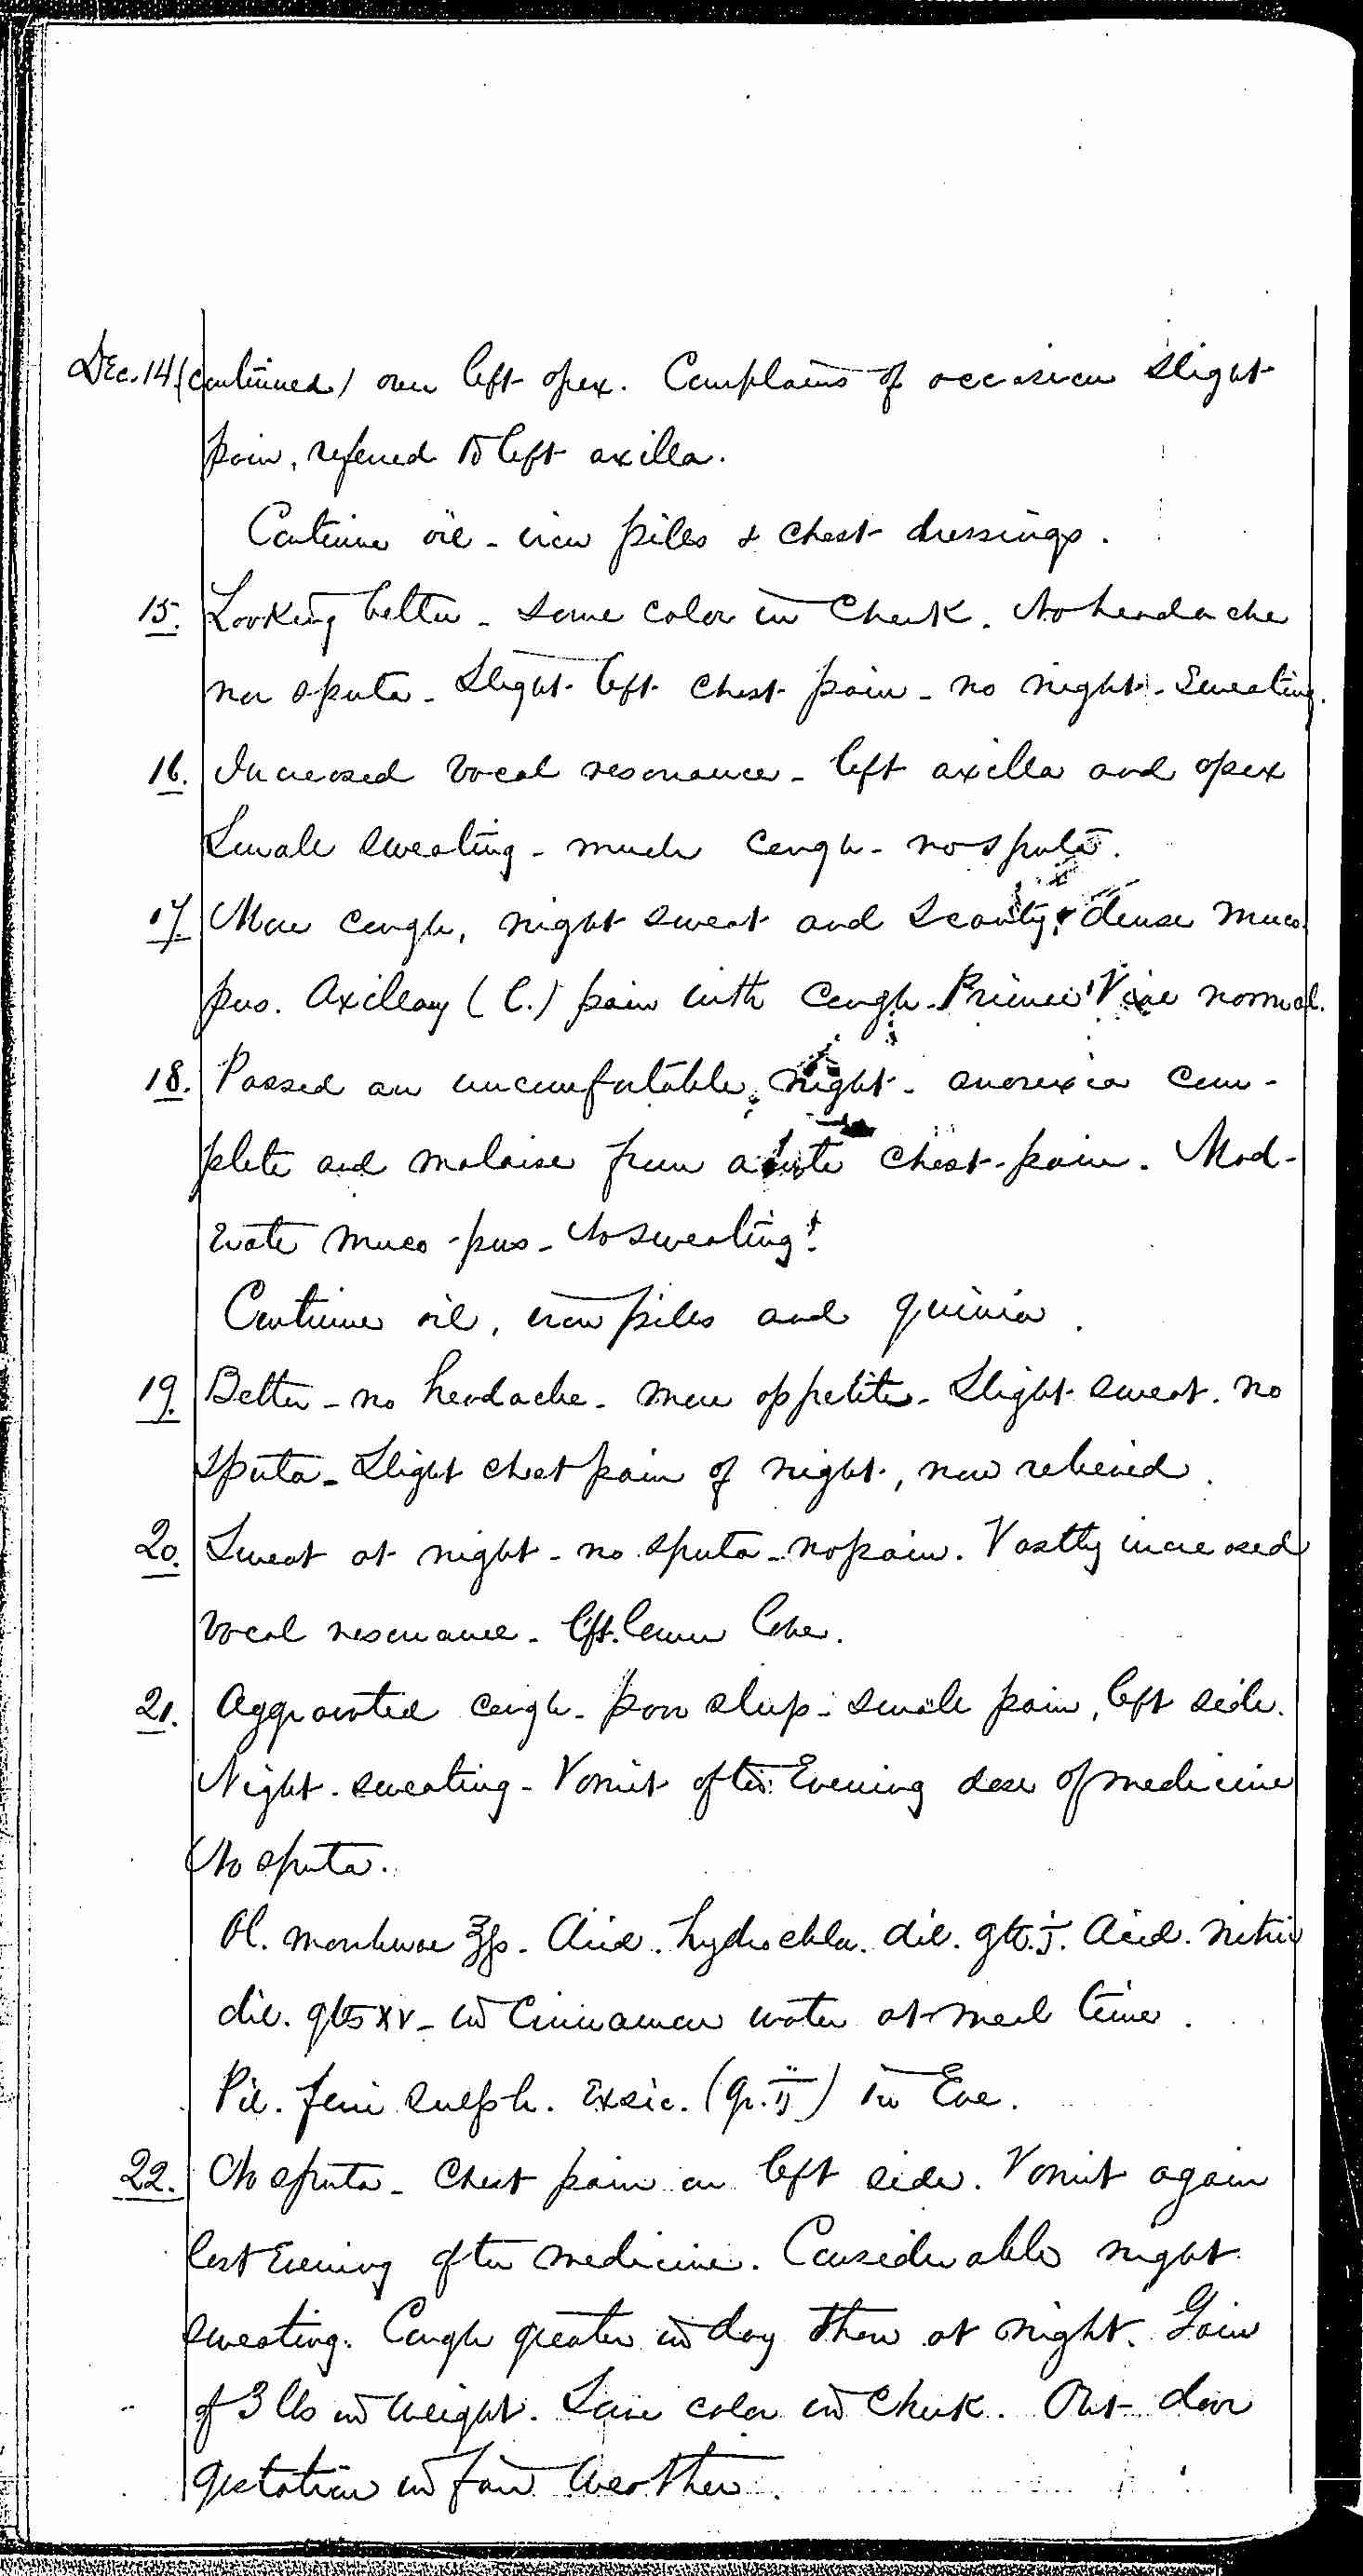 Entry for Richard Forn (page 10 of 21) in the log Hospital Tickets and Case Papers - Naval Hospital - Washington, D.C. - 1868-69